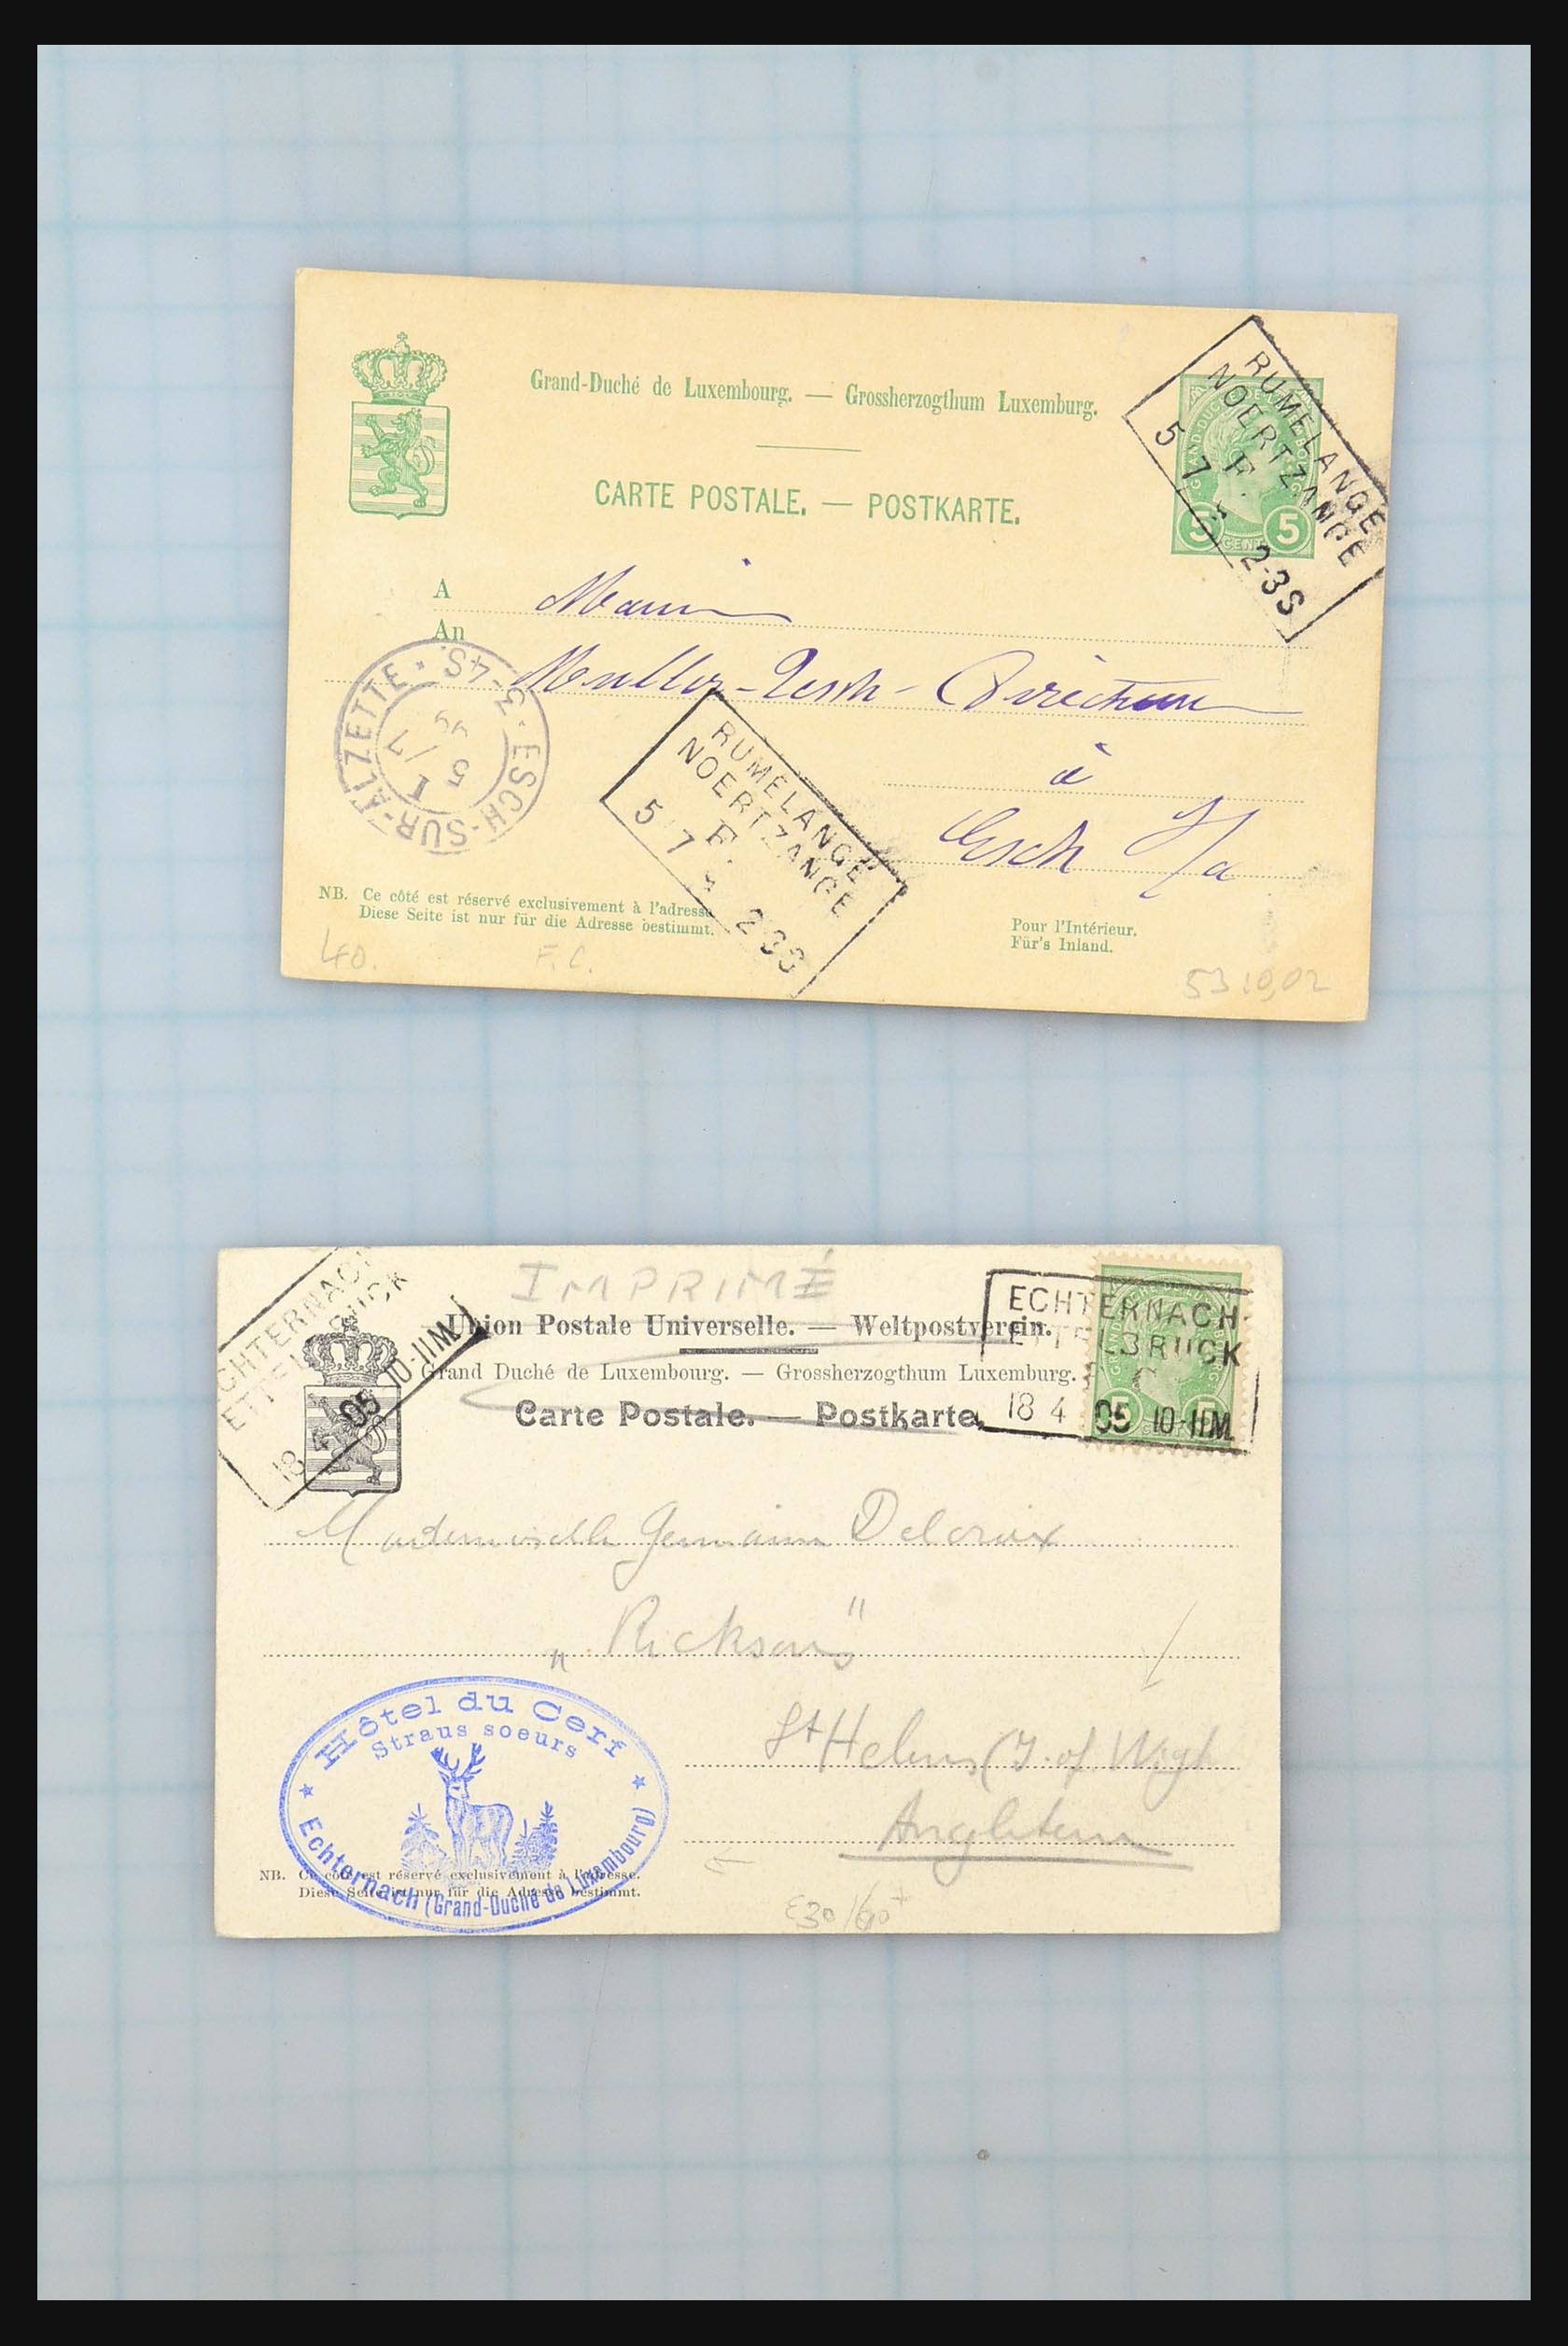 31358 084 - 31358 Portugal/Luxemburg/Greece covers 1880-1960.